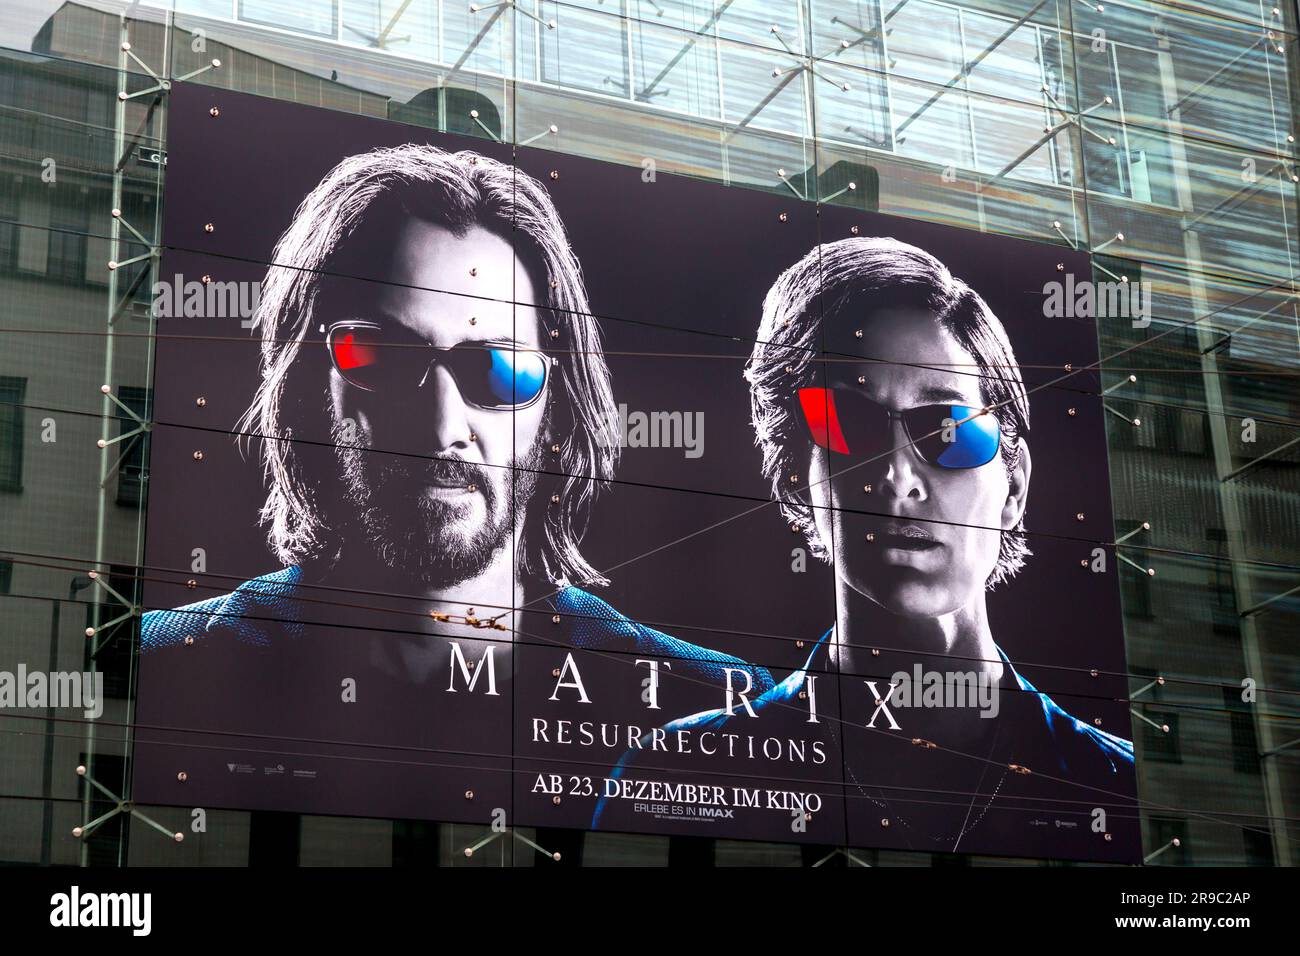 Munich, Germany - DEC 23, 2021: Large advertisement of the movie Matrix, Resurrections on the wall of a building on Bayerstrasse, Munich, Germany. Stock Photo